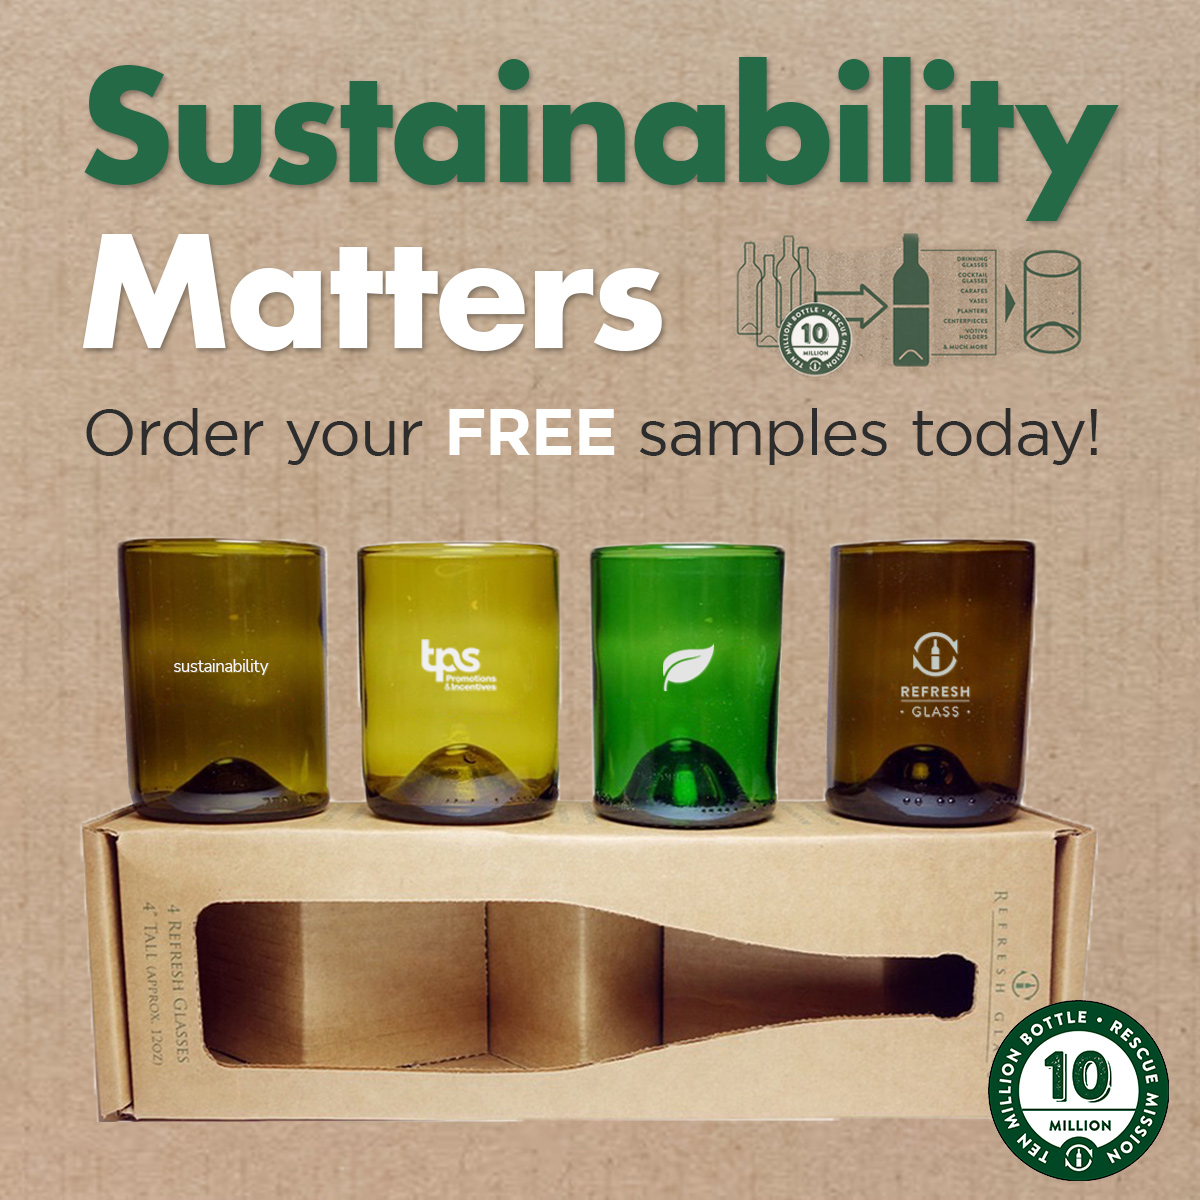 🌿 Join us on the 10 Million Bottle Rescue Mission with Refresh Glass and request your free samples set today!

Request your free samples:
tpscan.com/refresh-glass/… 

All refresh glass products:
shop.tpscan.com/refresh-glass.…

#Sustainability #refreshglass #promotionalproducts